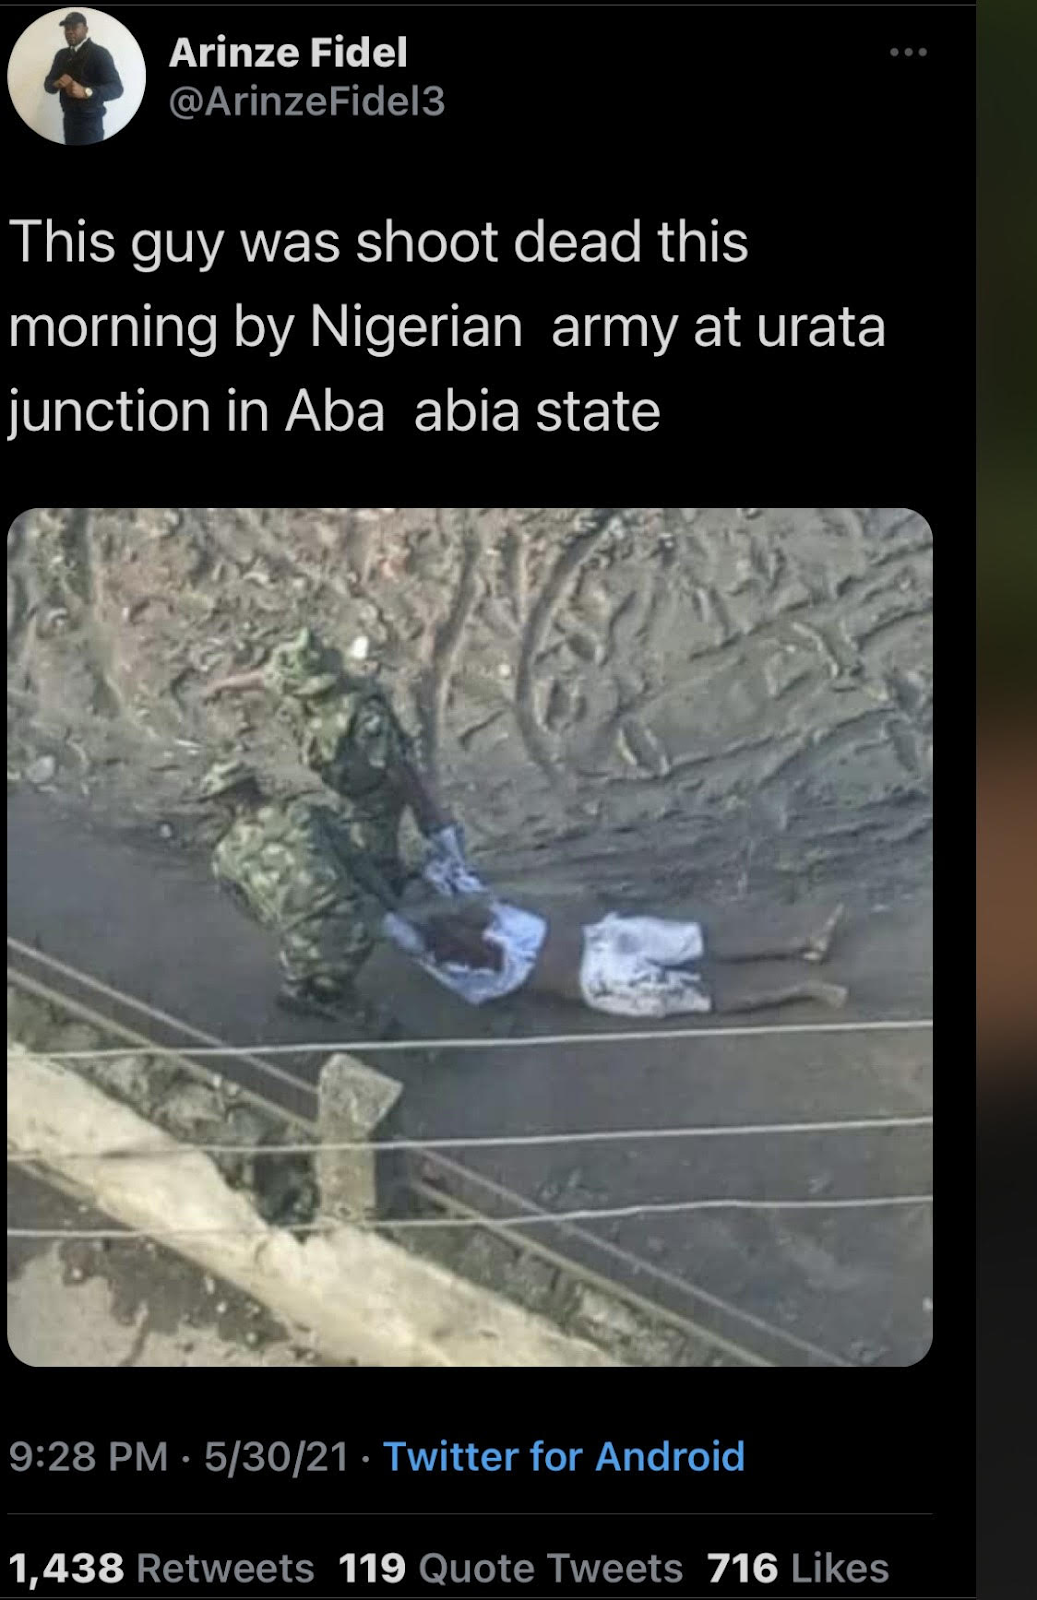 2018 photograph recycled as recent military attack in Abia 